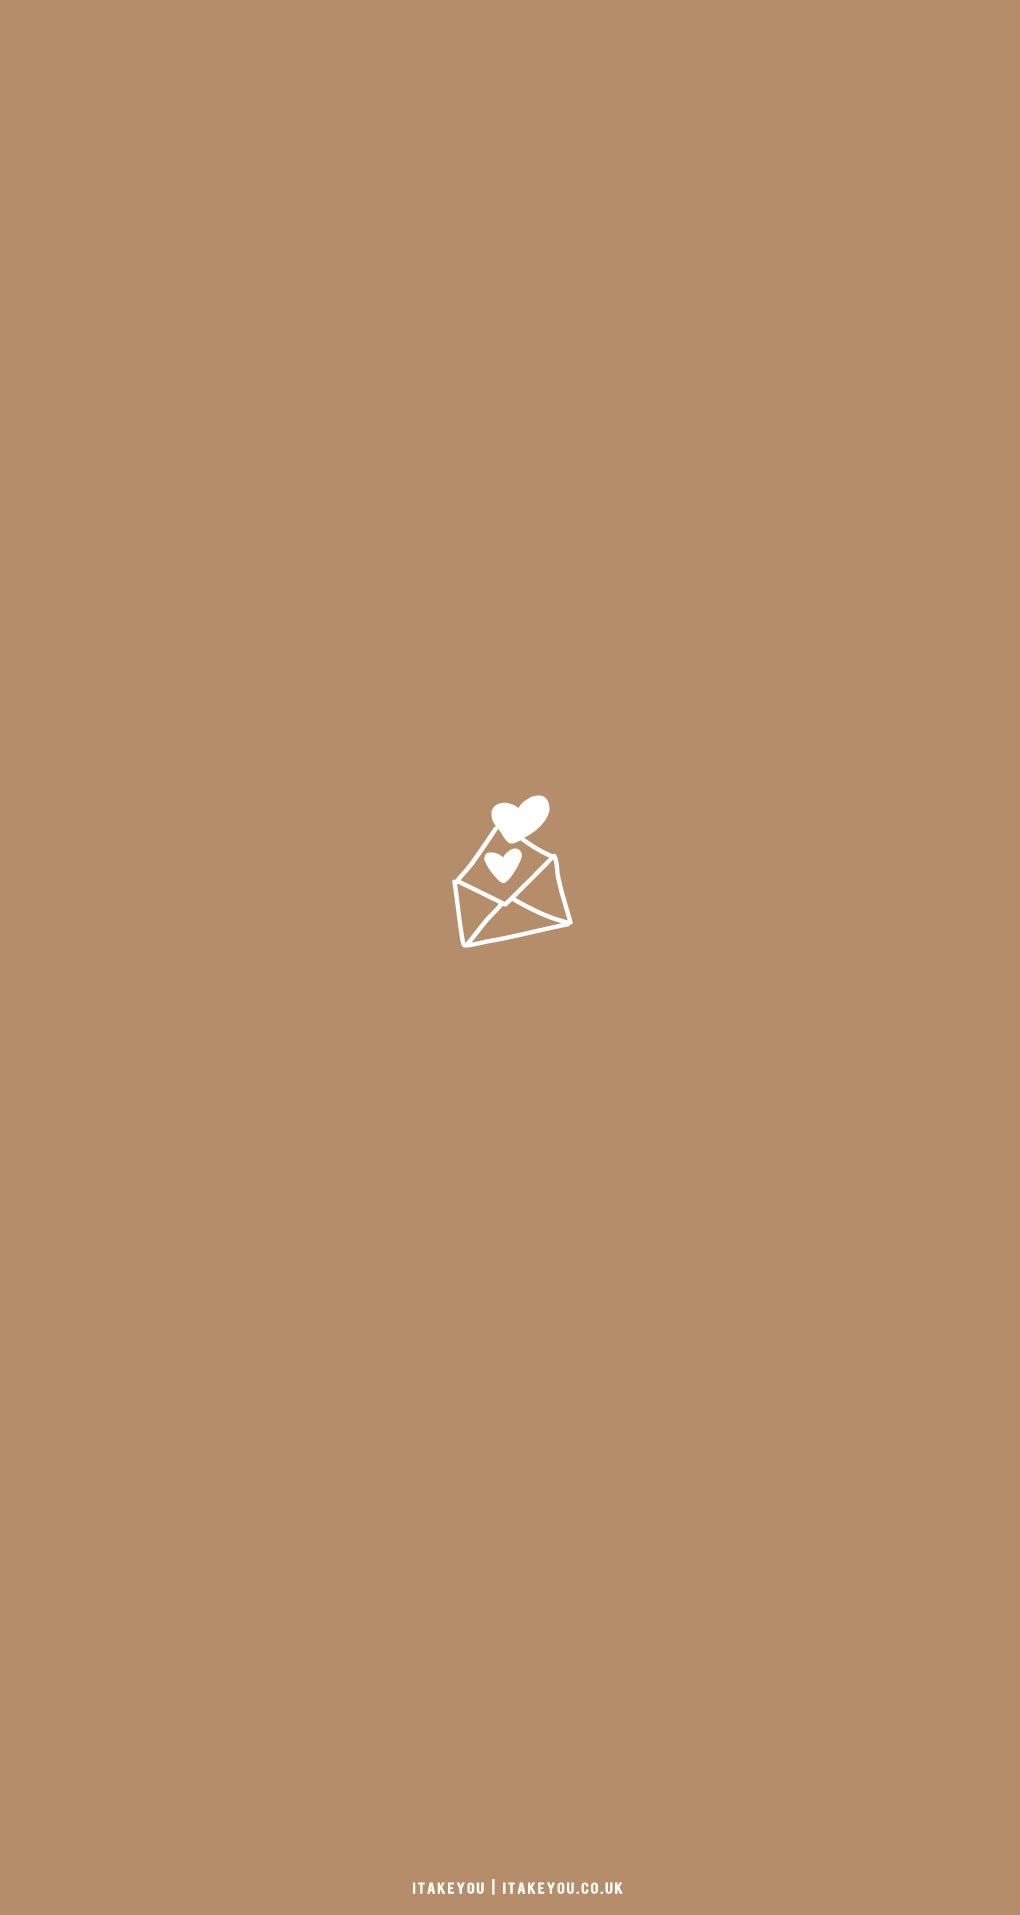 Cute Brown Aesthetic Wallpaper for Phone, Love Letter Background I Take You. Wedding Readings. Wedding Ideas